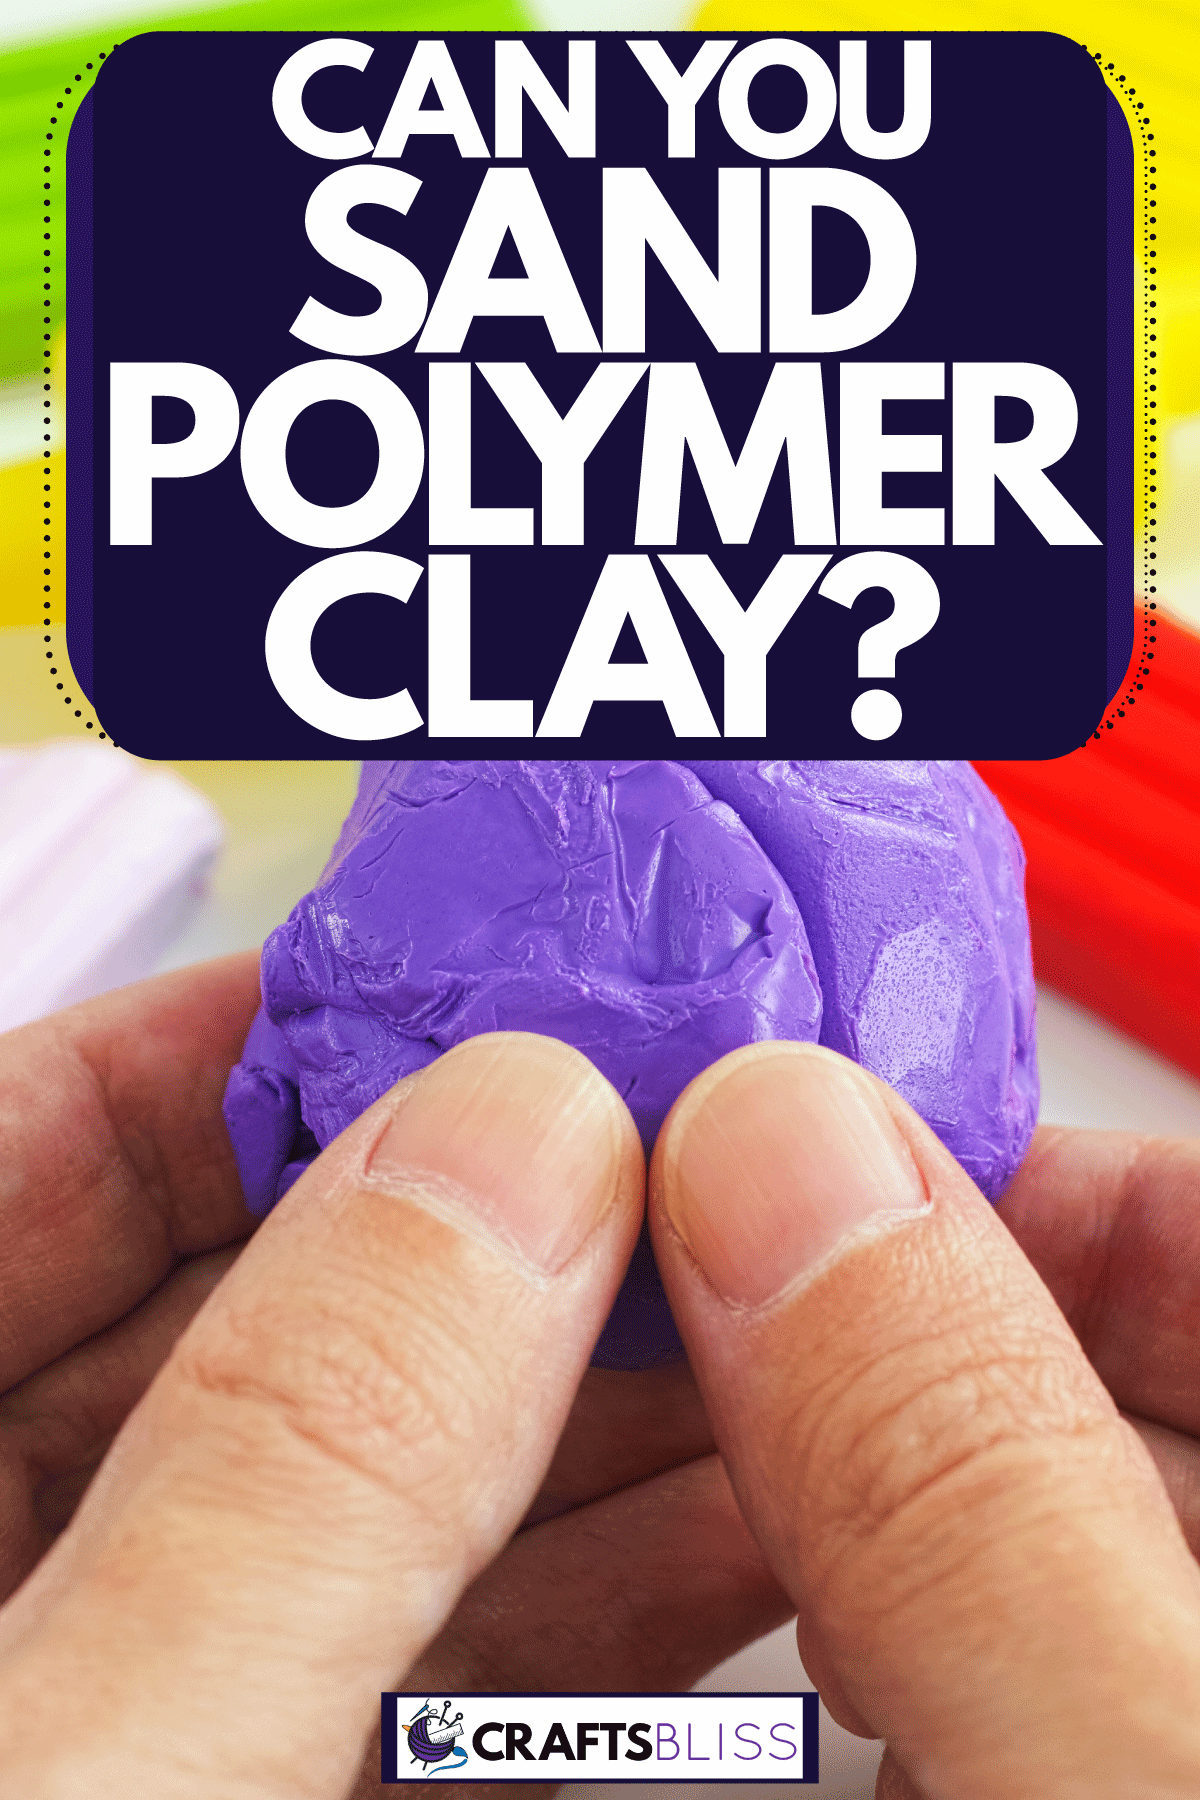 A man holding a piece of polymer clay and molding it, Can You Sand Polymer Clay?